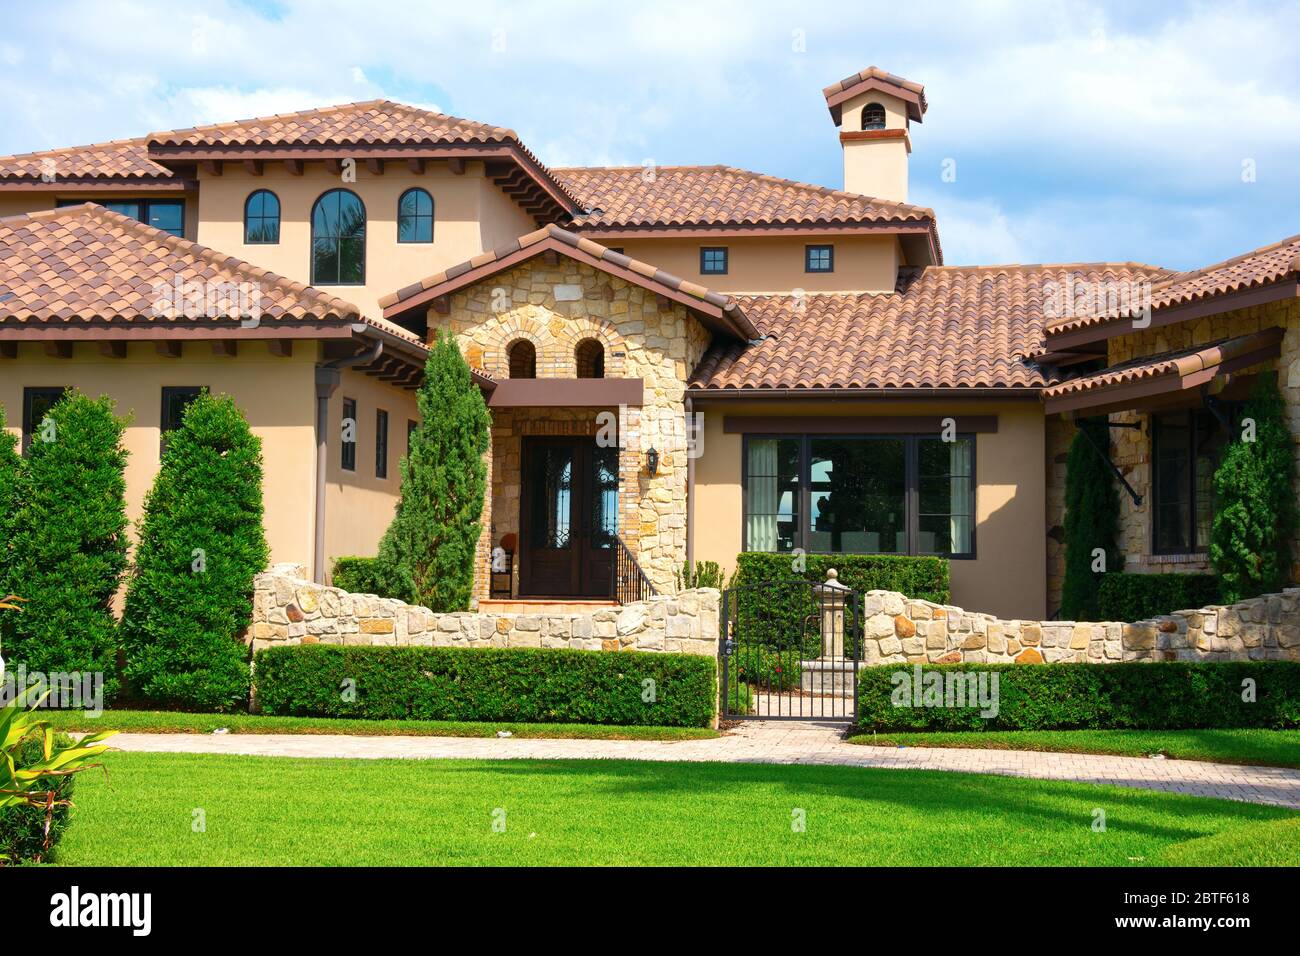 Beautiful Spanish style house exterior with natural rock facing and veneer siding and an impeccably maintained lawn and landscaping. Stock Photo